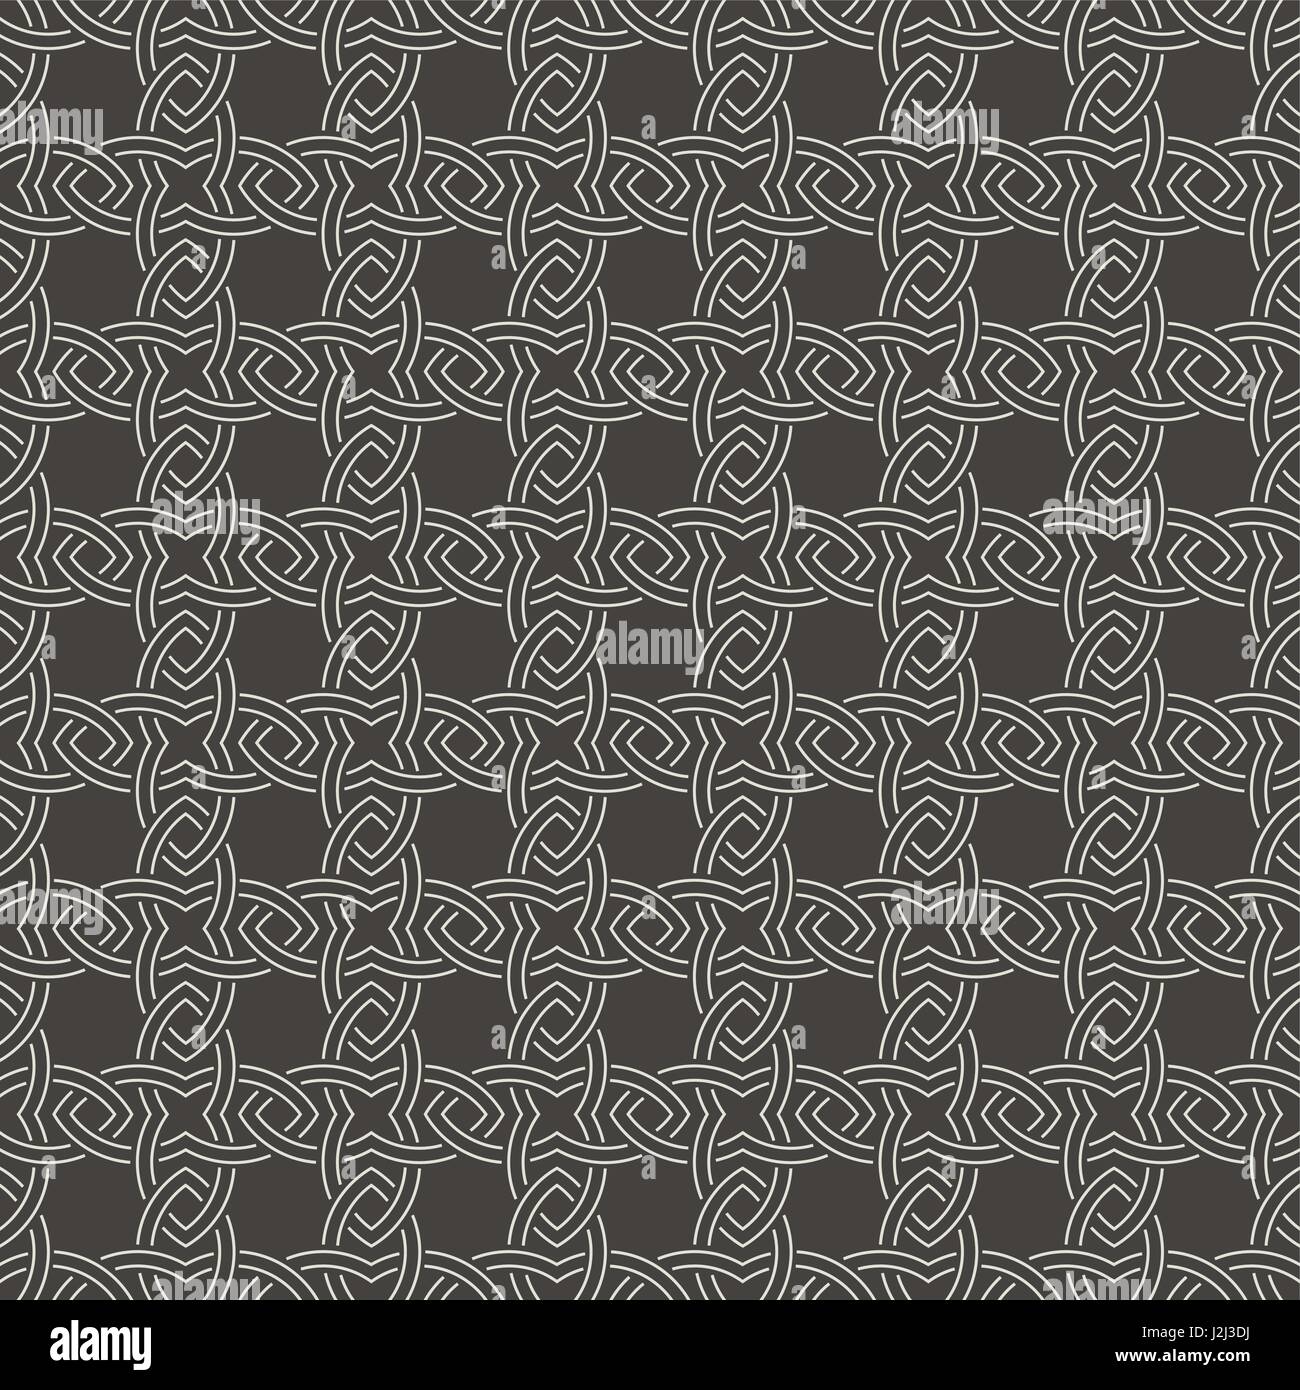 Vector seamless pattern. Repeating luxury elegant texture. You can use seamless patterns as background, fabric print, surface texture, wrapping paper, Stock Vector